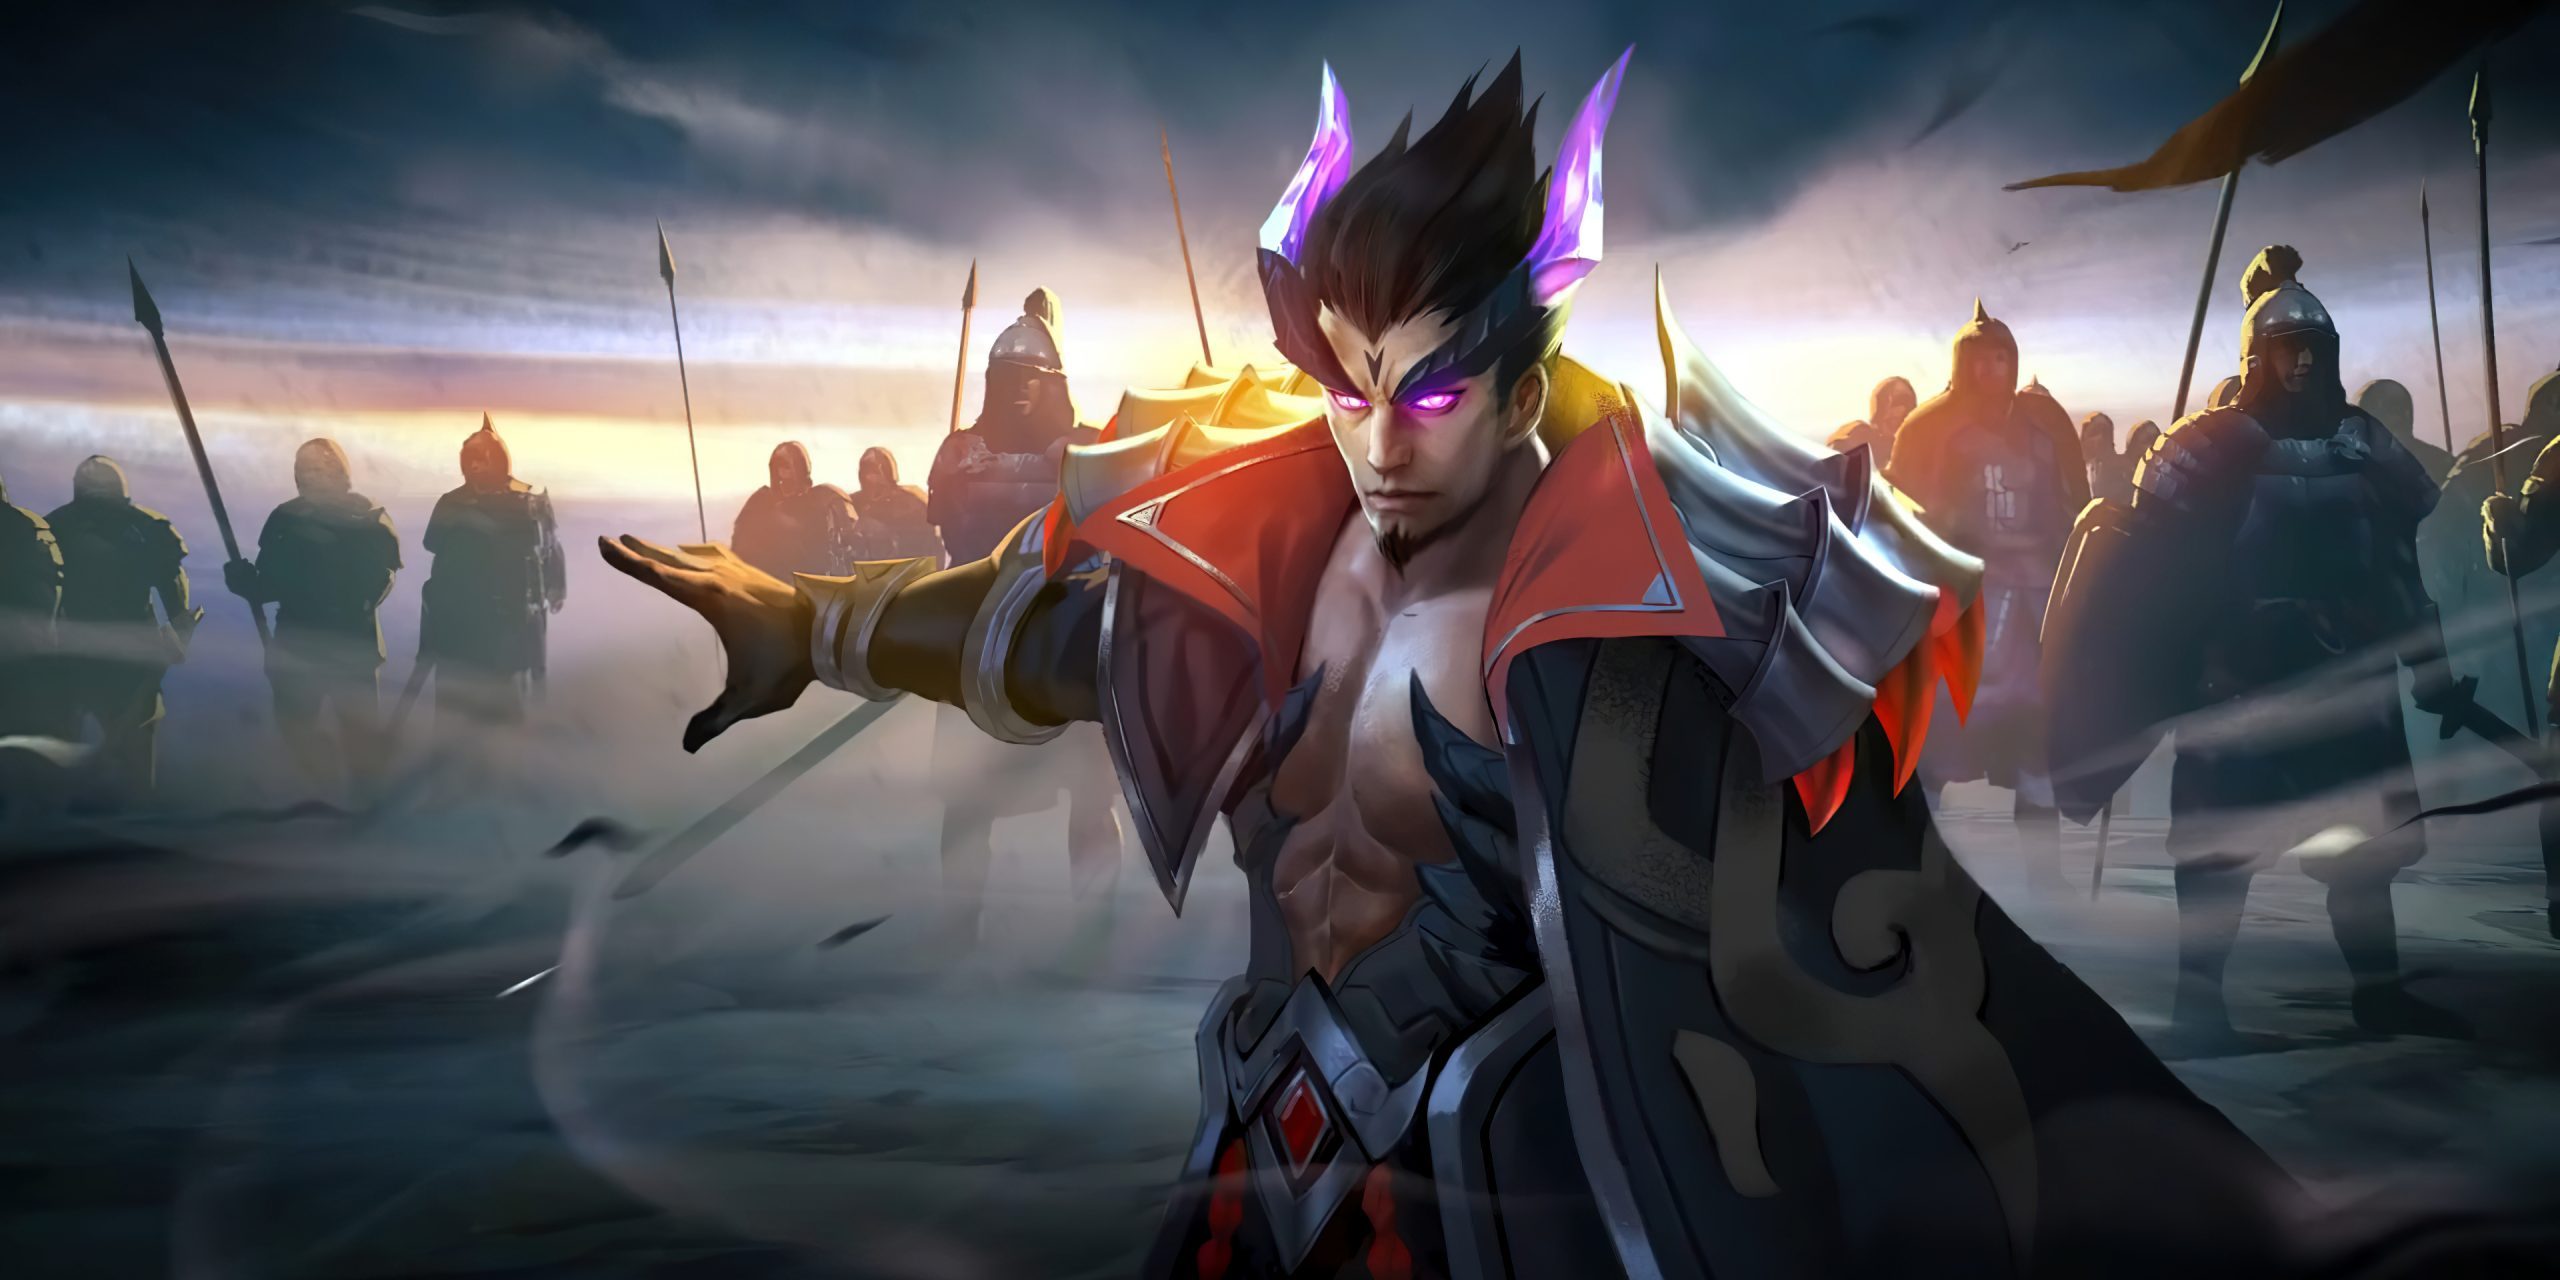 Wallpaper Full HD Yu Zhong Skin Mobile Lagends For PC and Phone